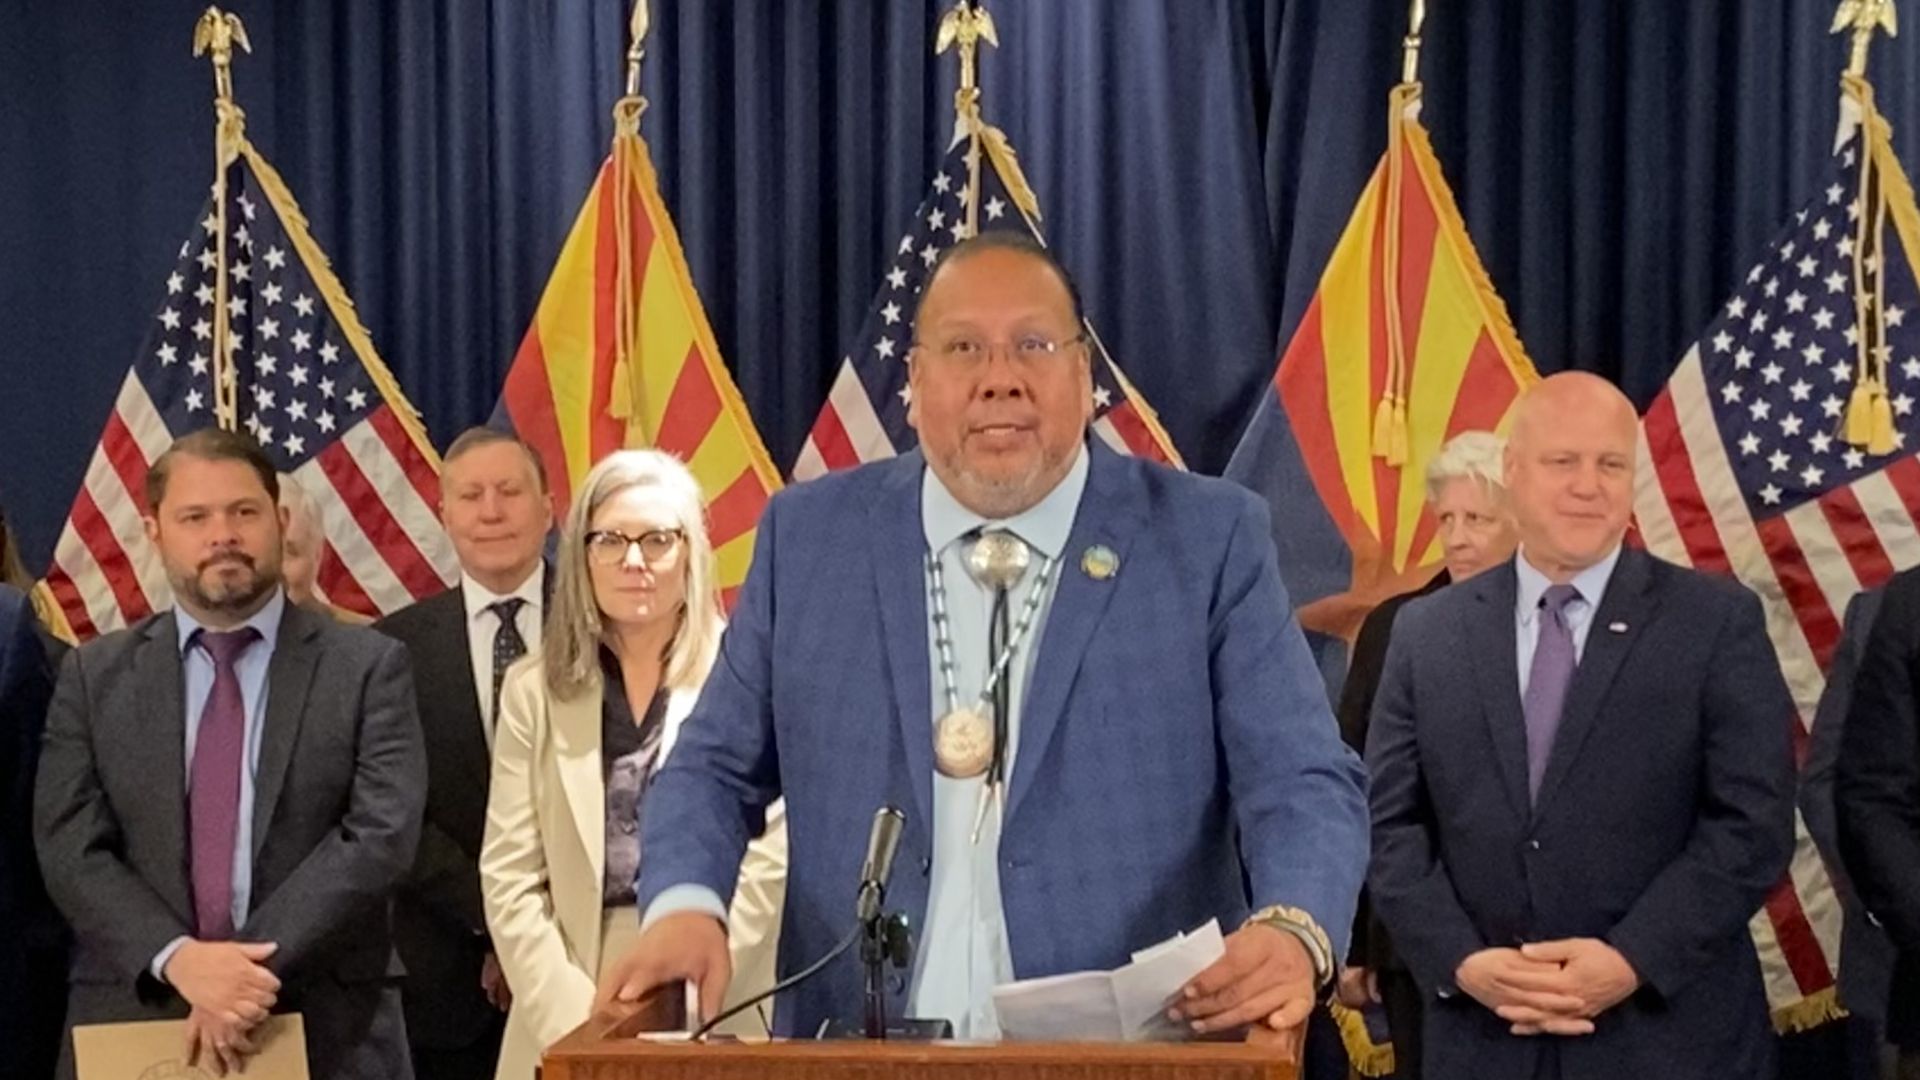 A man in a sport coat and a bolo tie speaks at a podium with several people and a row of US and Arizona flags behind him. 